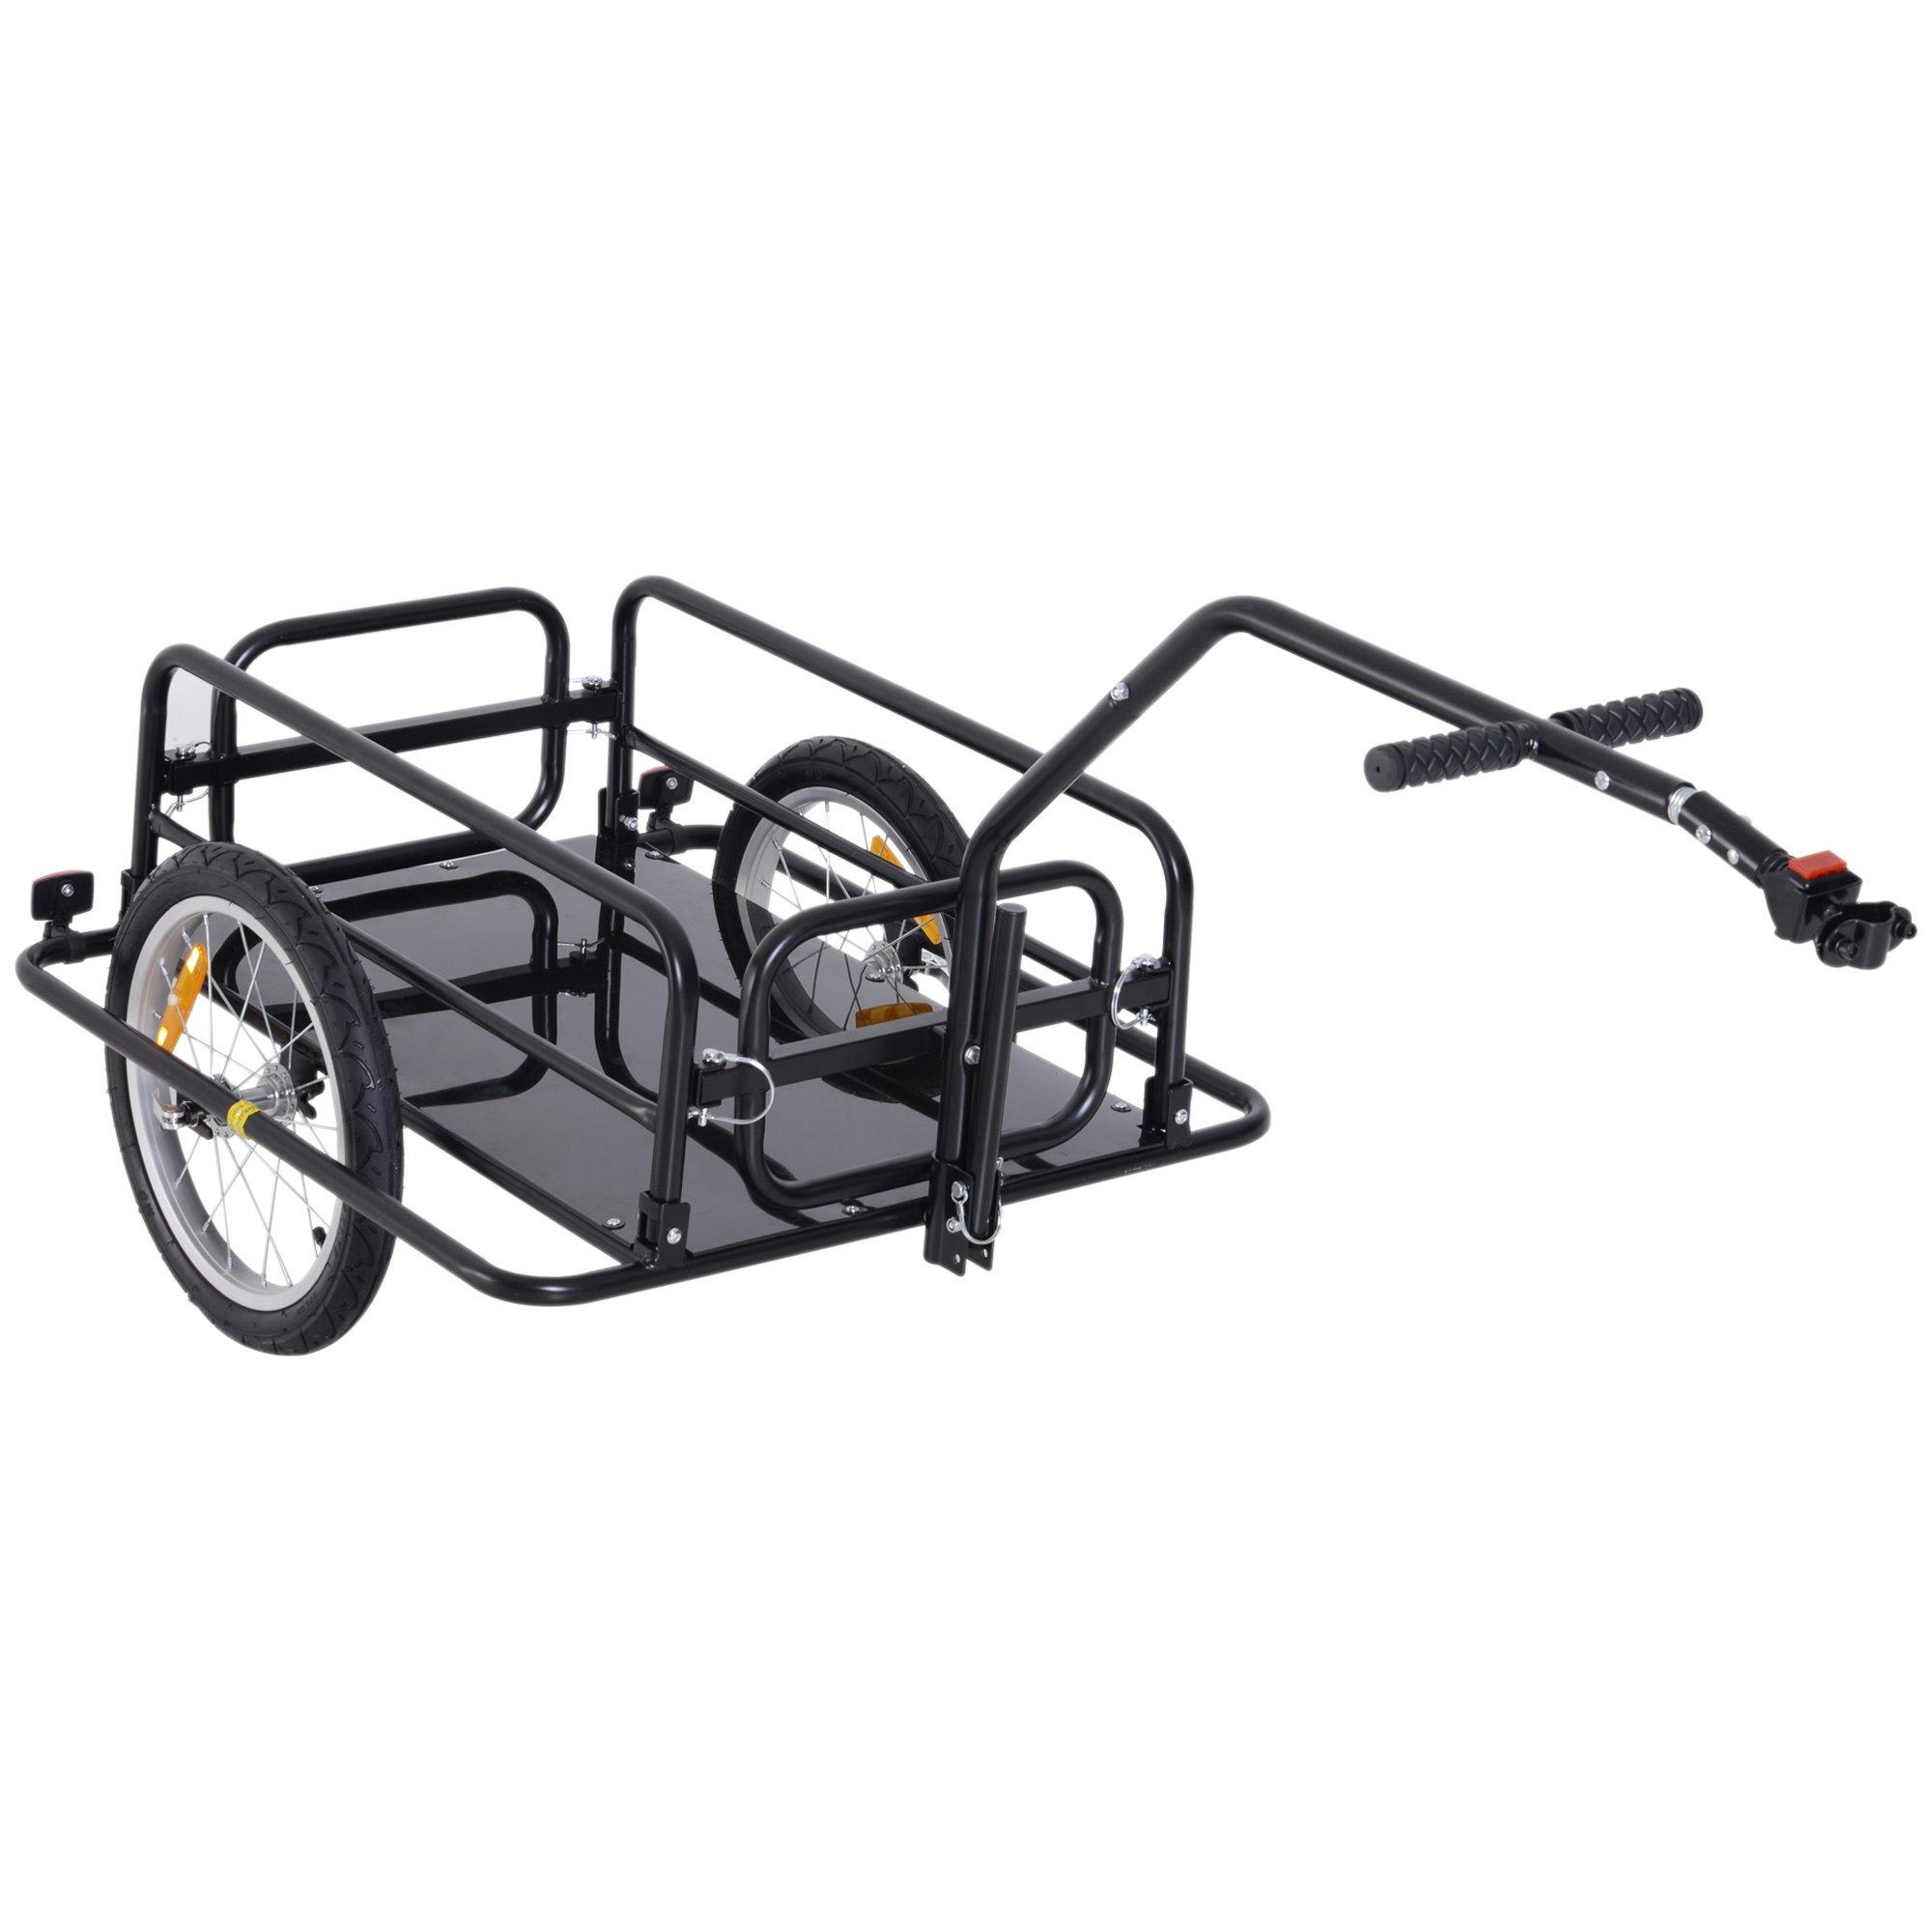 Folding Bicycle Cargo Storage Cart and Luggage Trailer with Hitch Black